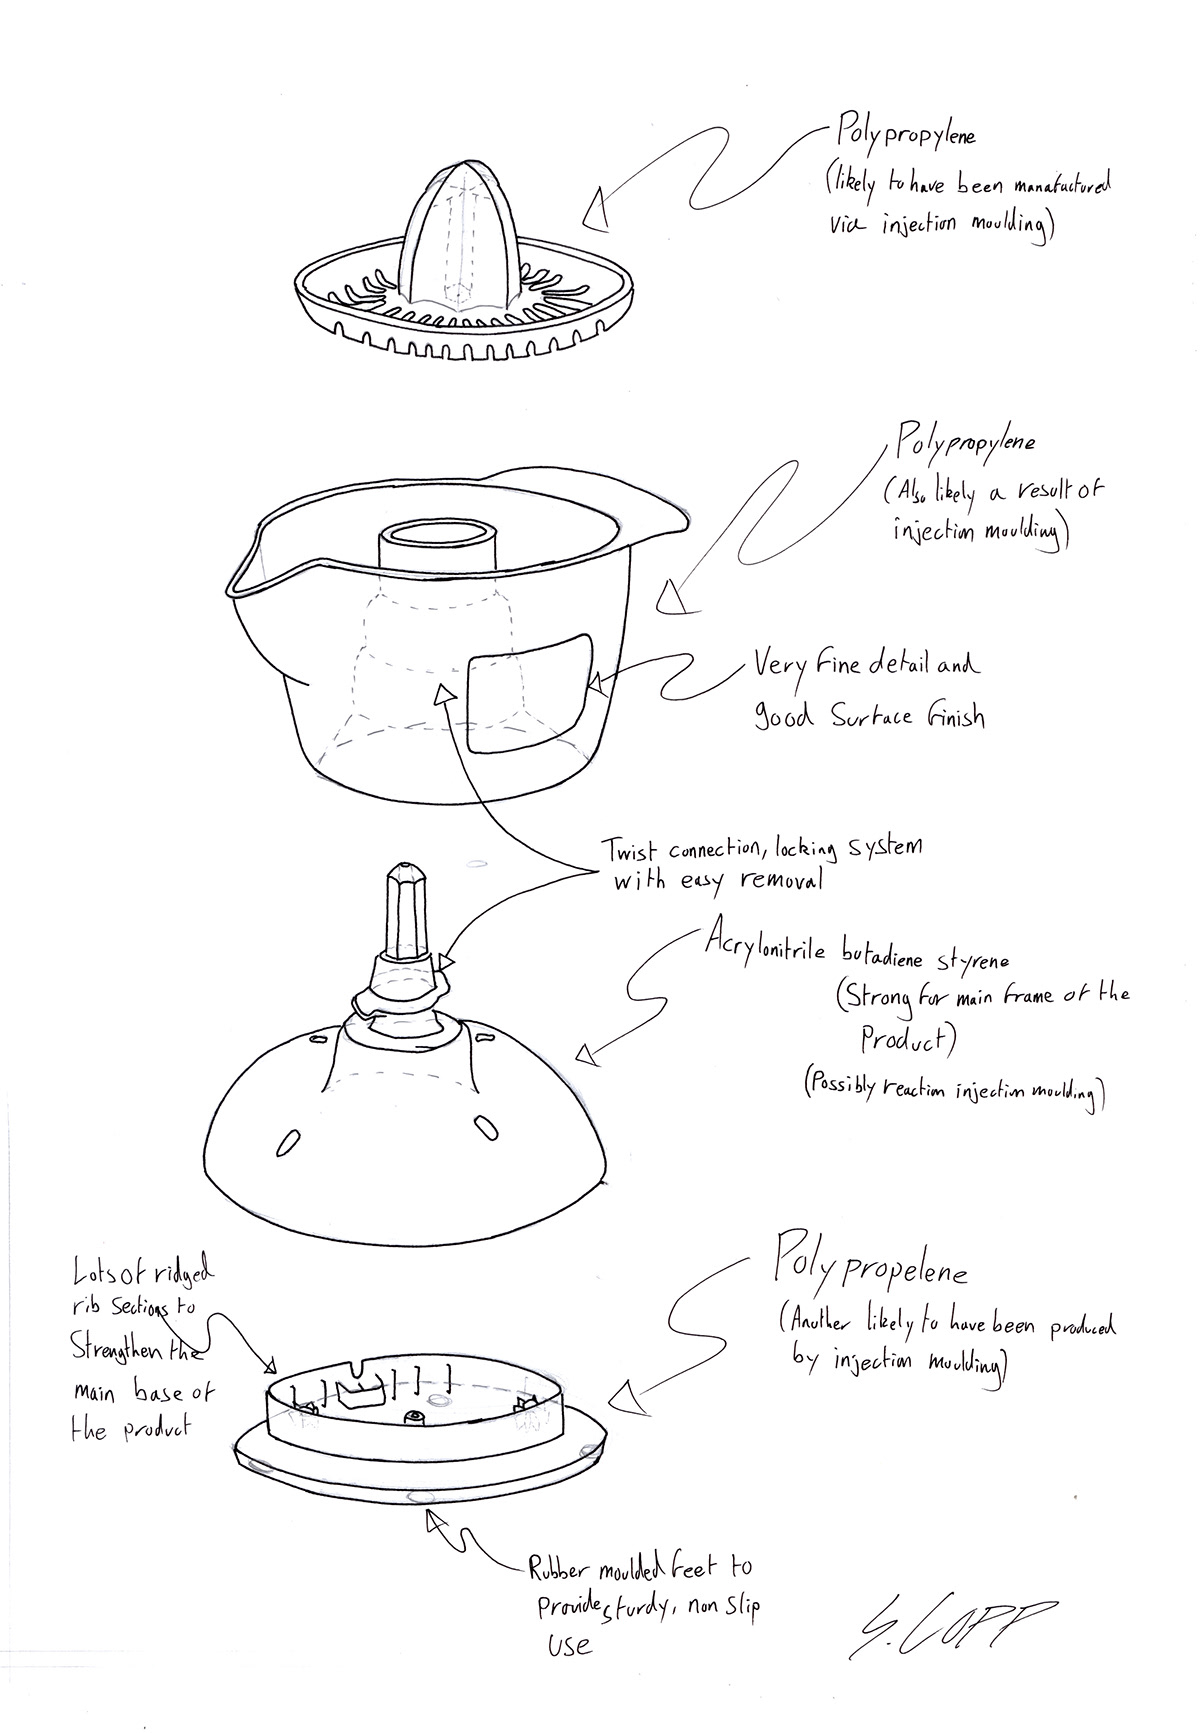 Reverse Engineering product first year Juicer manufacture